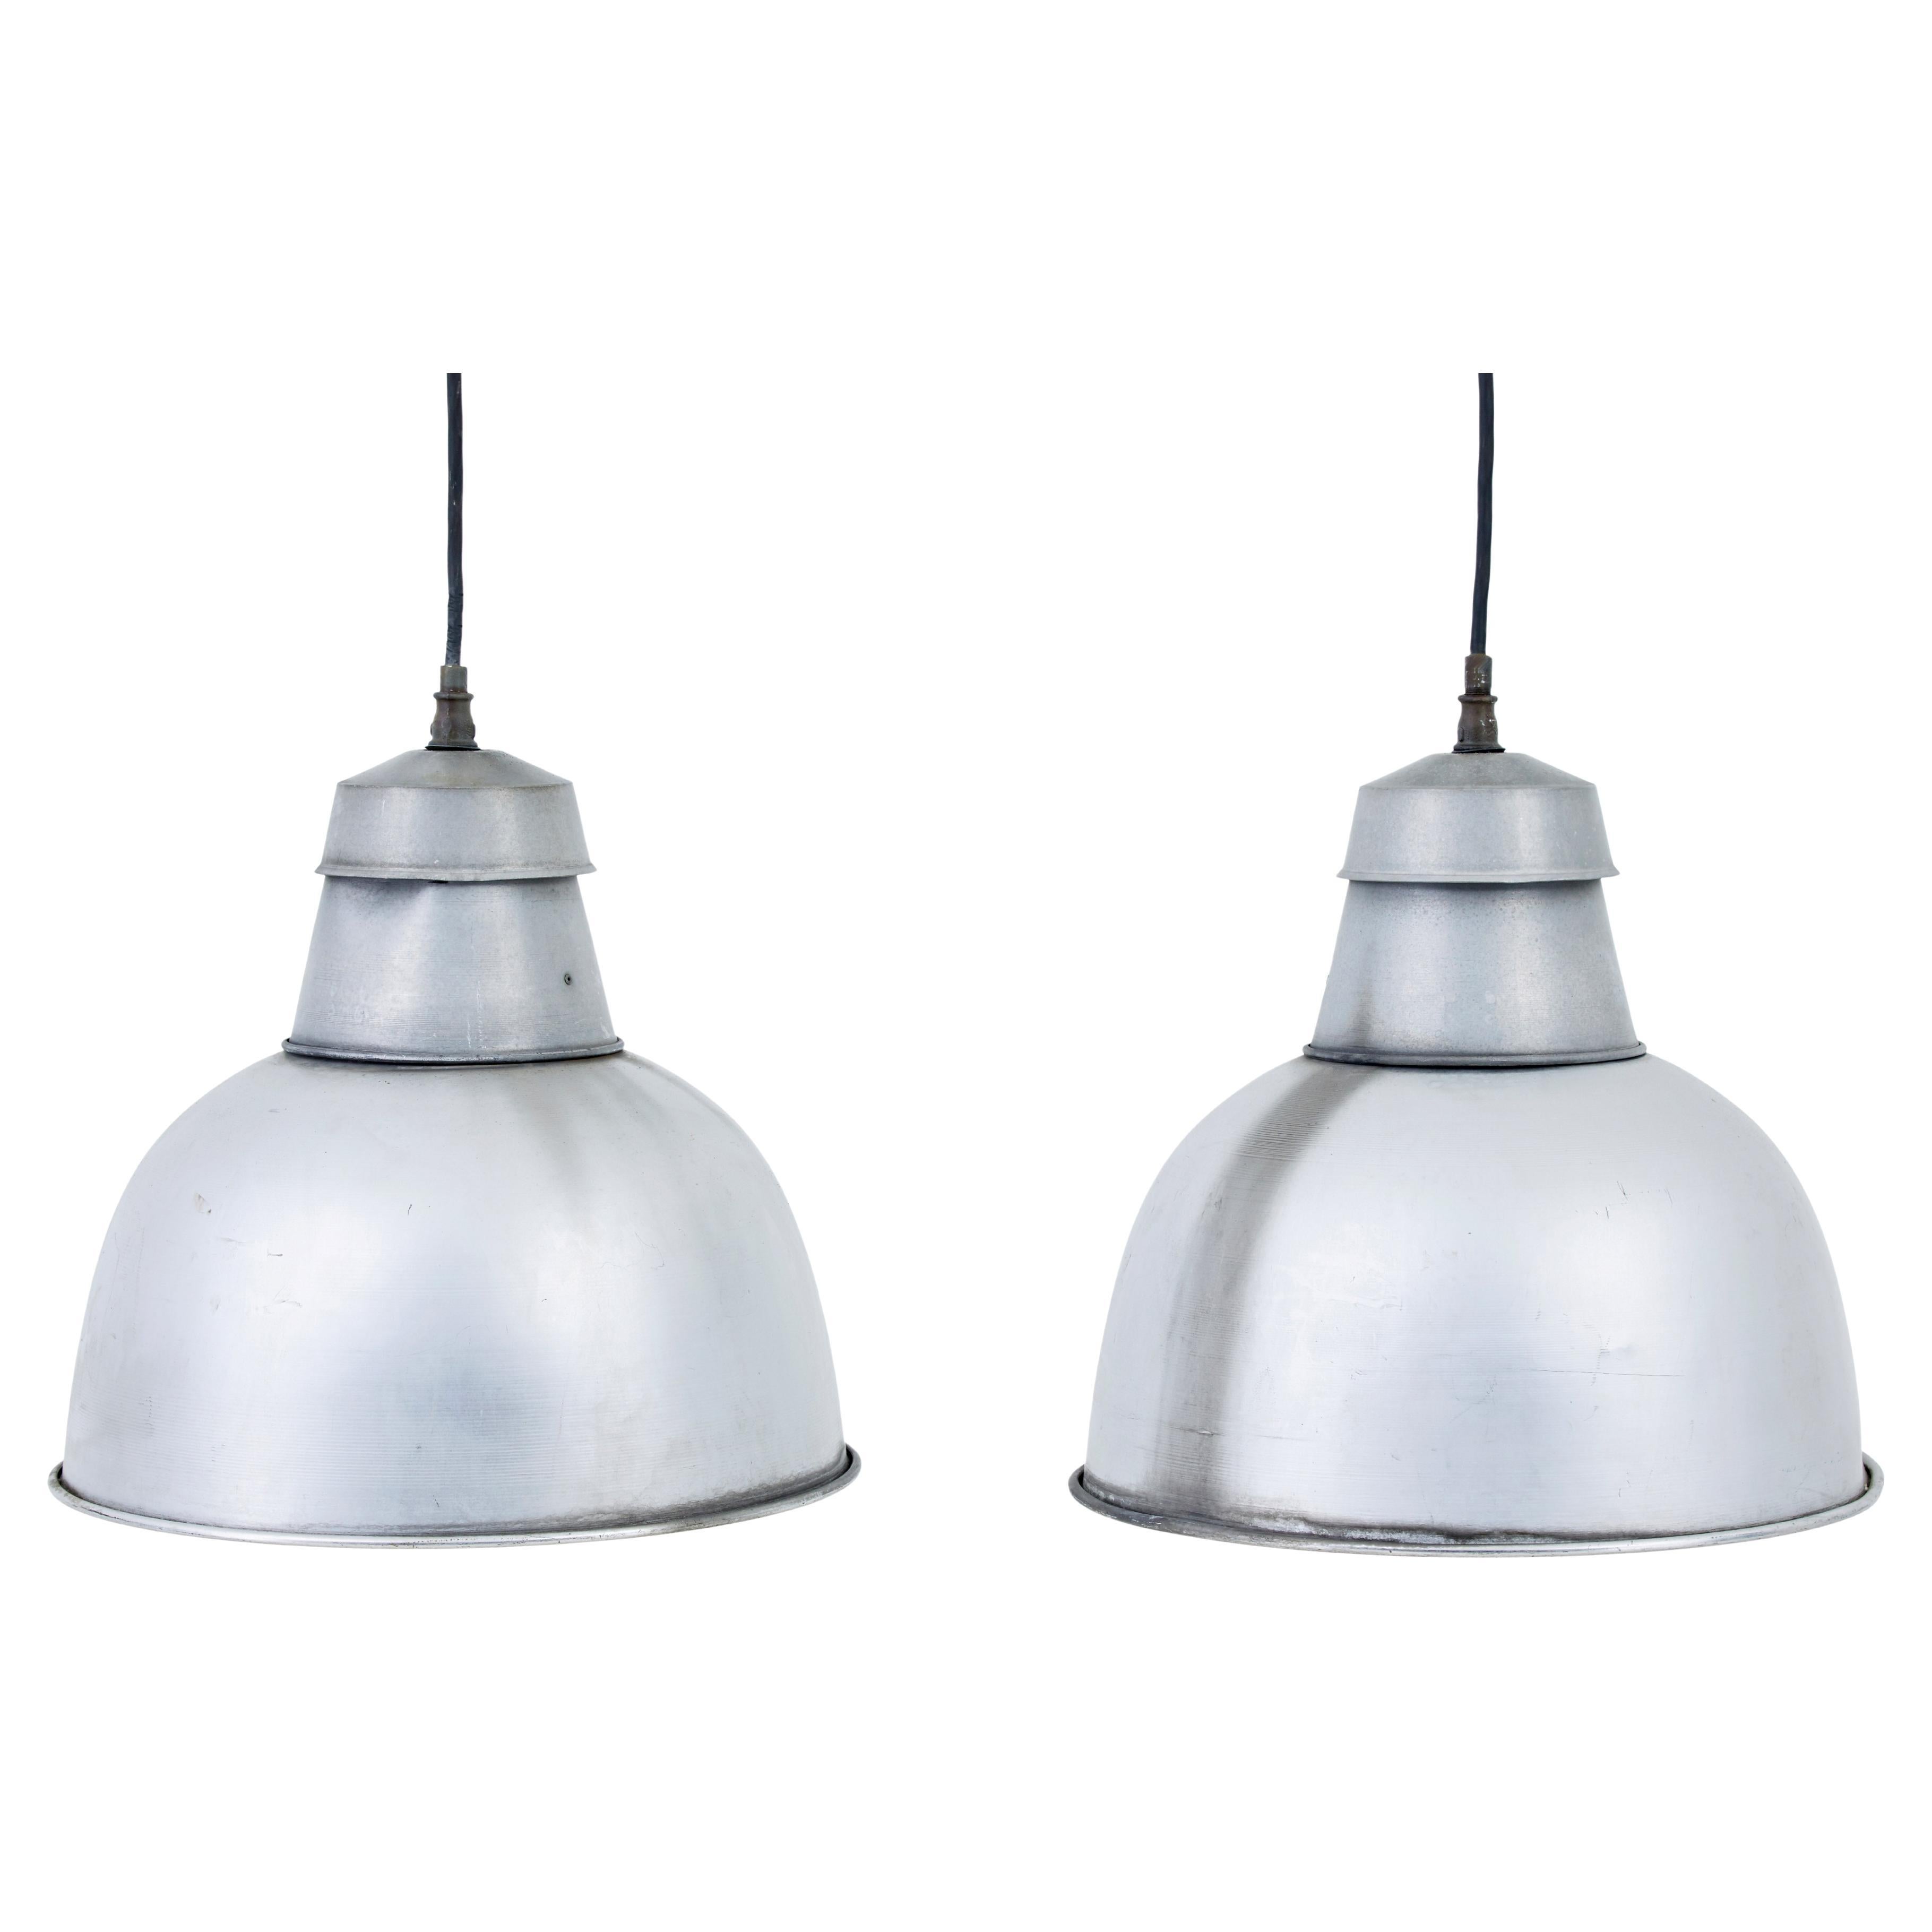 Pair of 1920’s industrial metal hanging ceiling lights For Sale